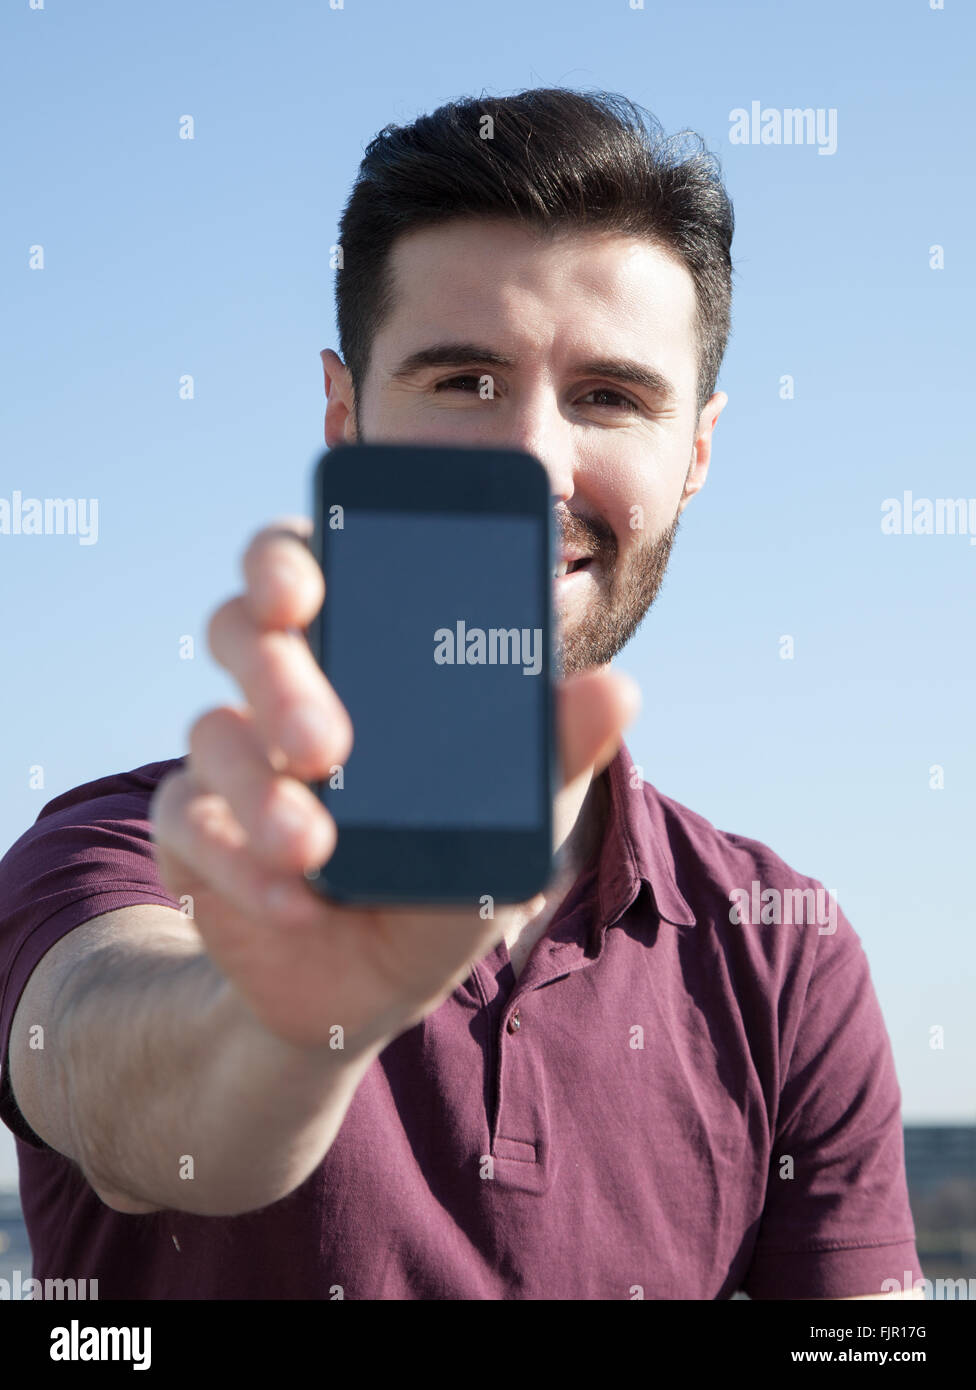 Attractive young man holding smart phone Stock Photo